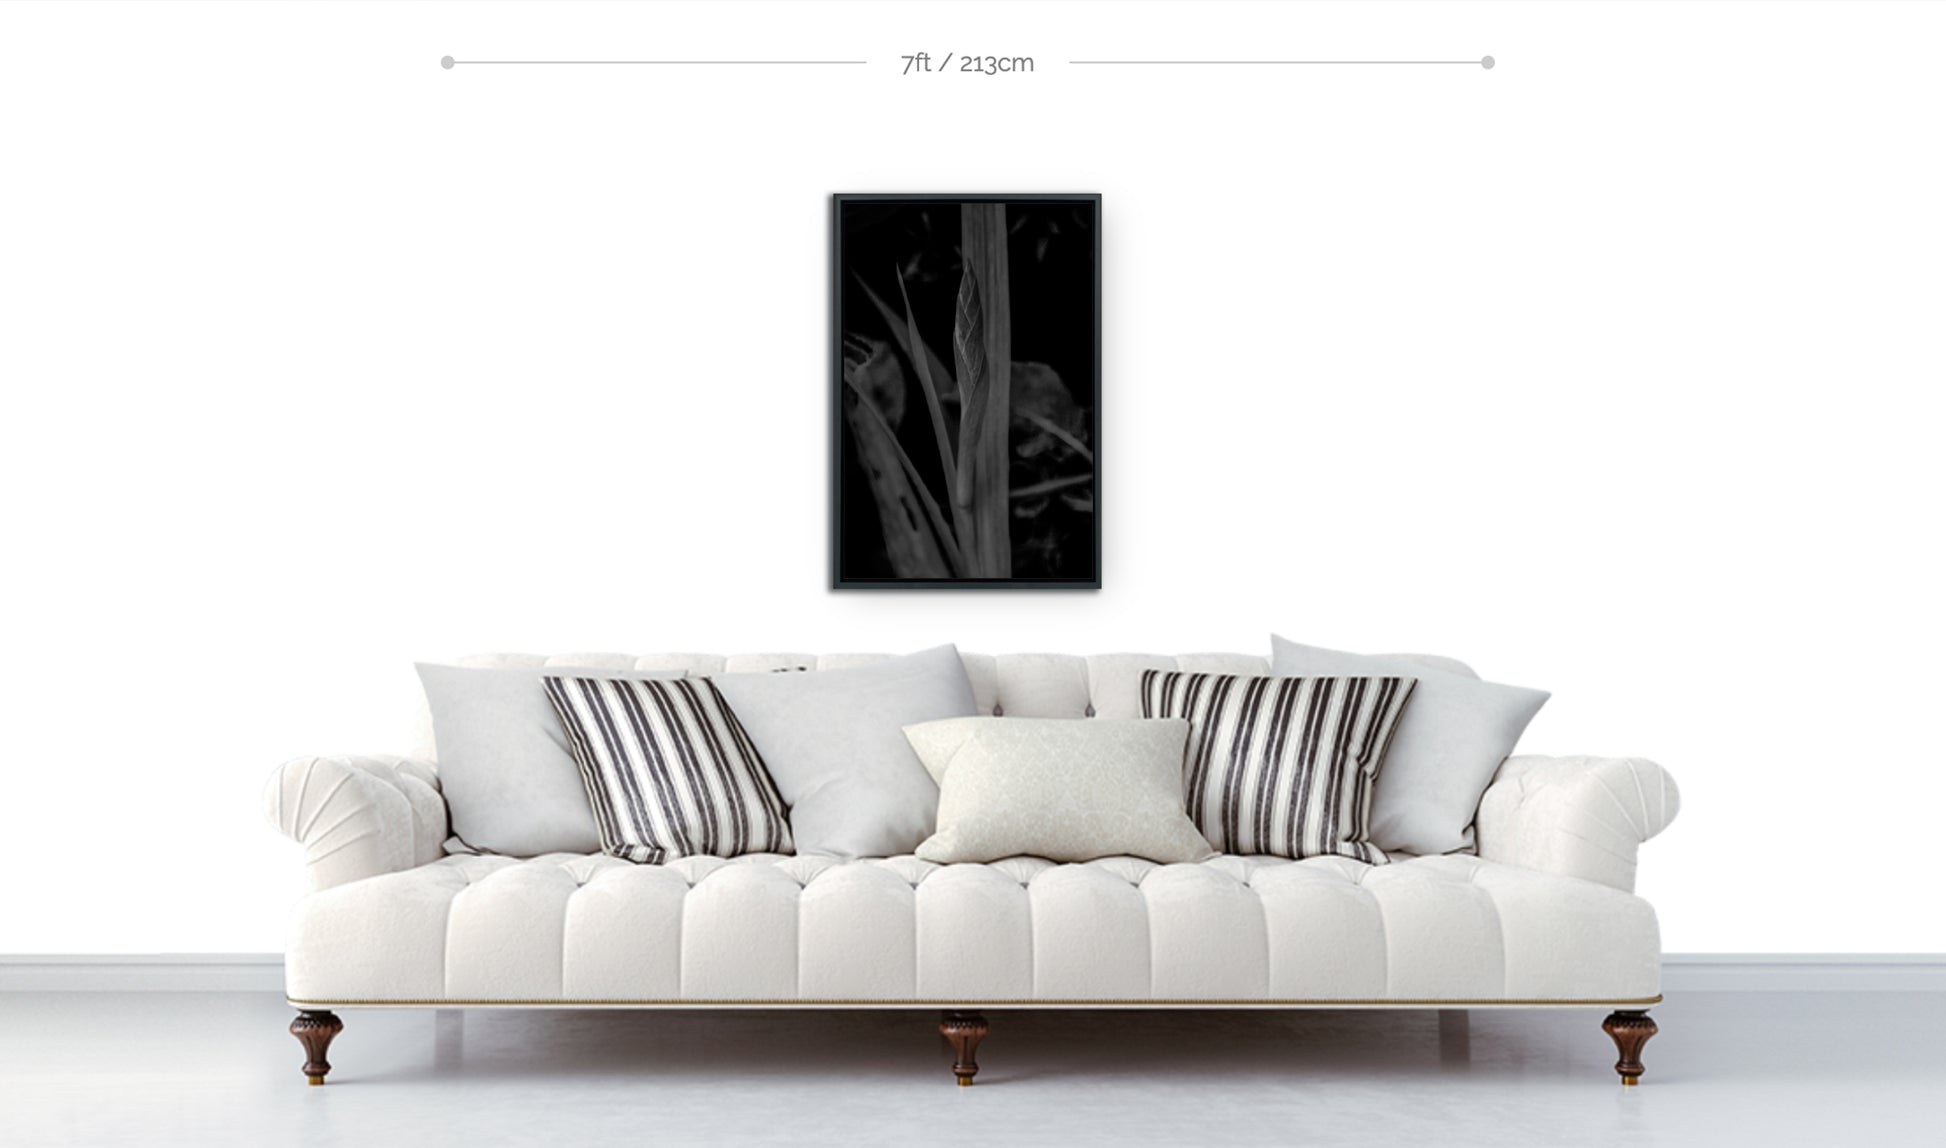 Botanical wall art preview 30x20 framed print displayed hanging above sofa